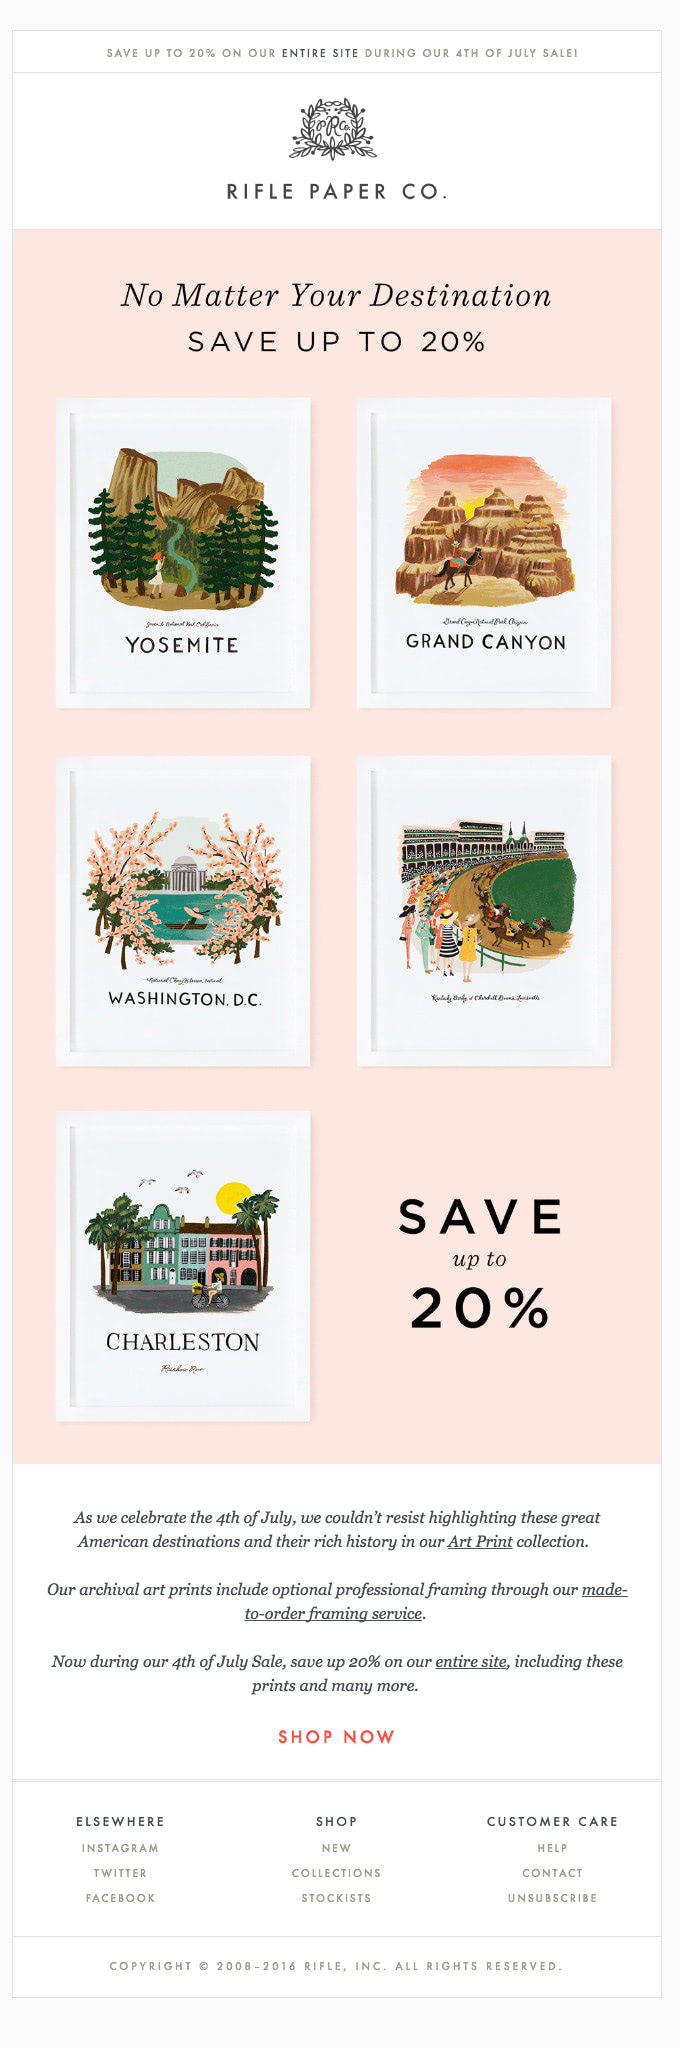 Email from Rifle Paper Co